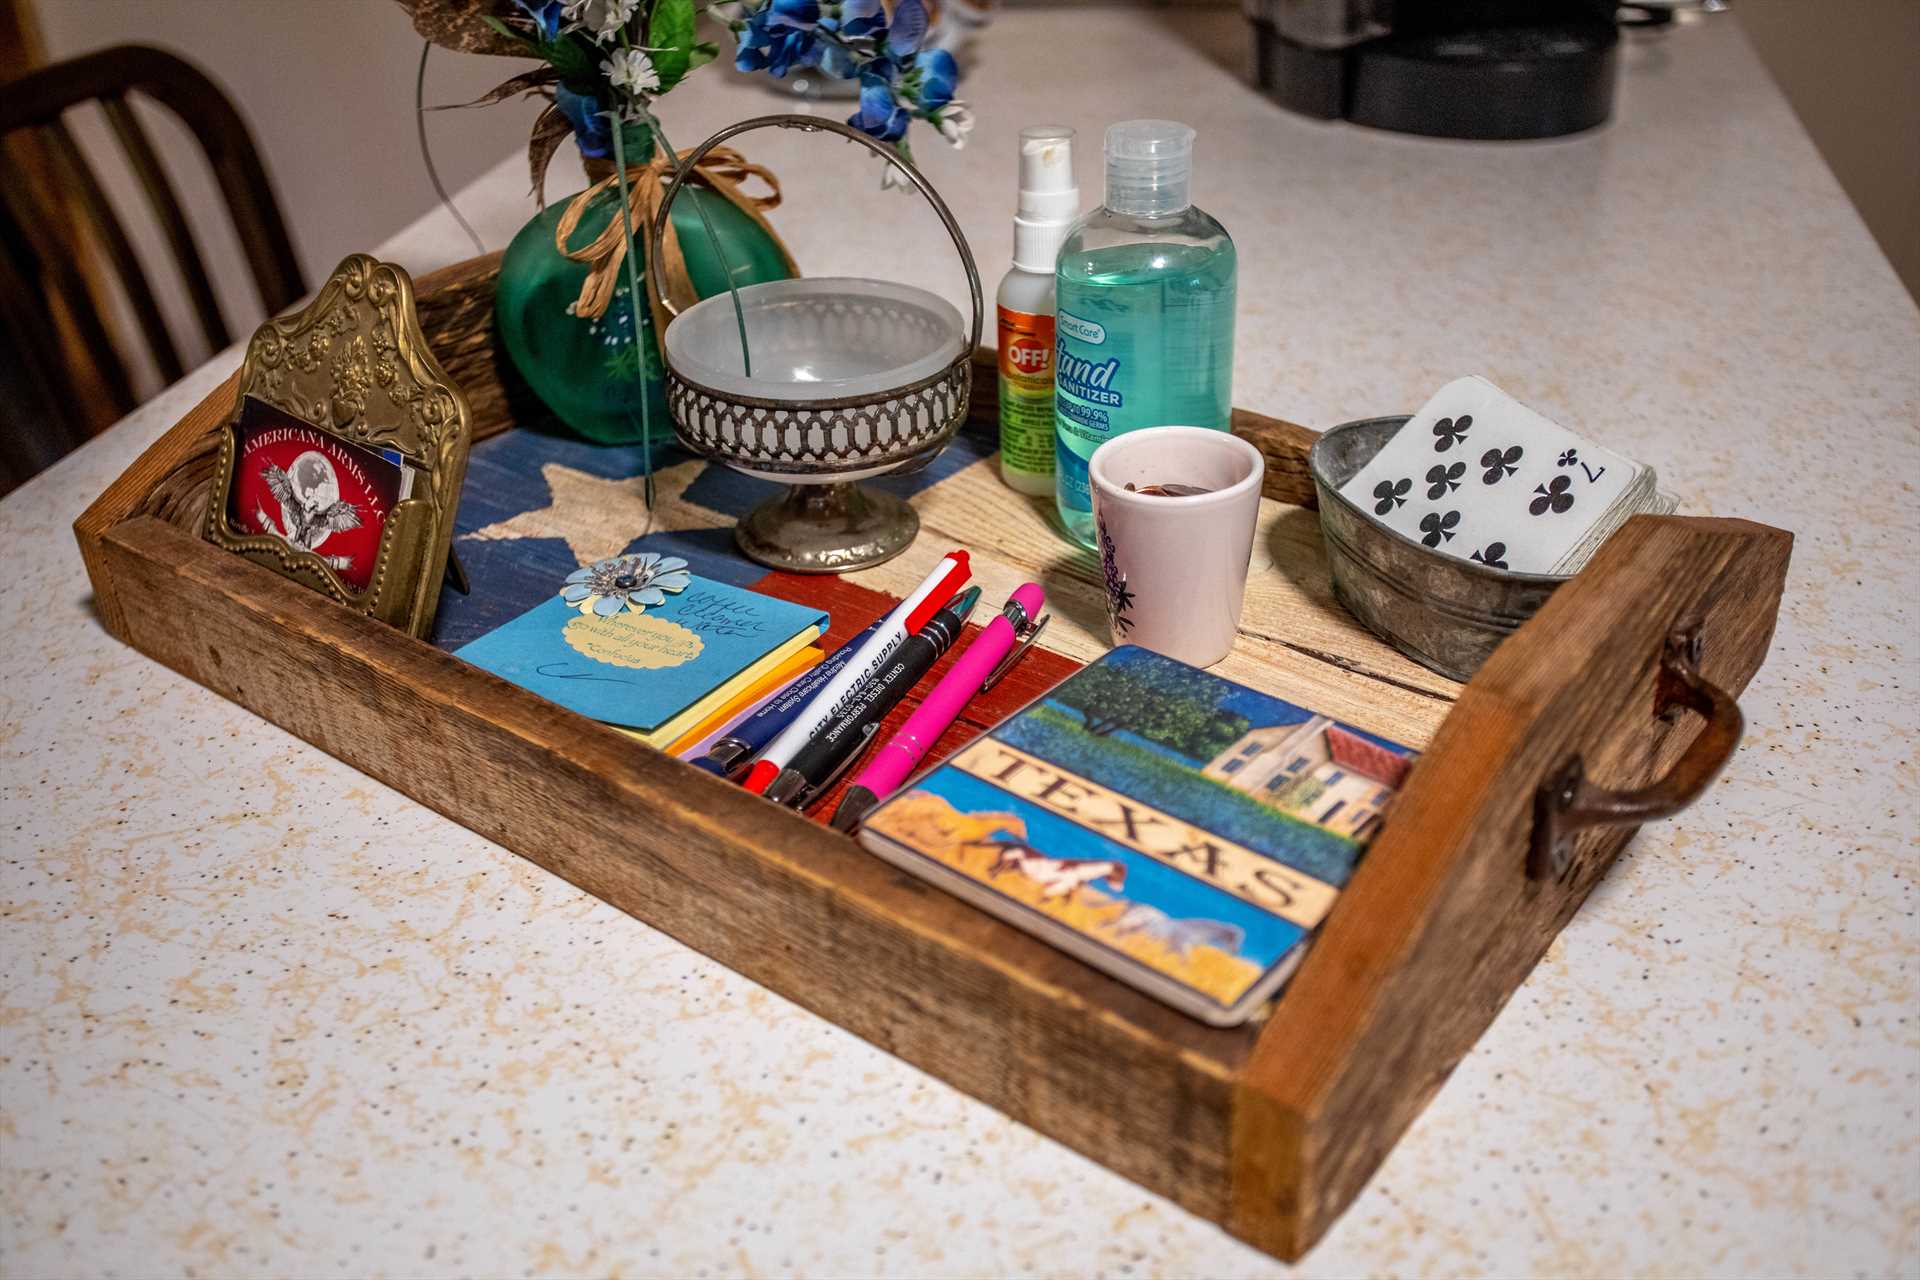                                                 Fun, decorative, and useful touches can be found throughout the cabin, reflecting the hospitality and friendliness for which the region is known.